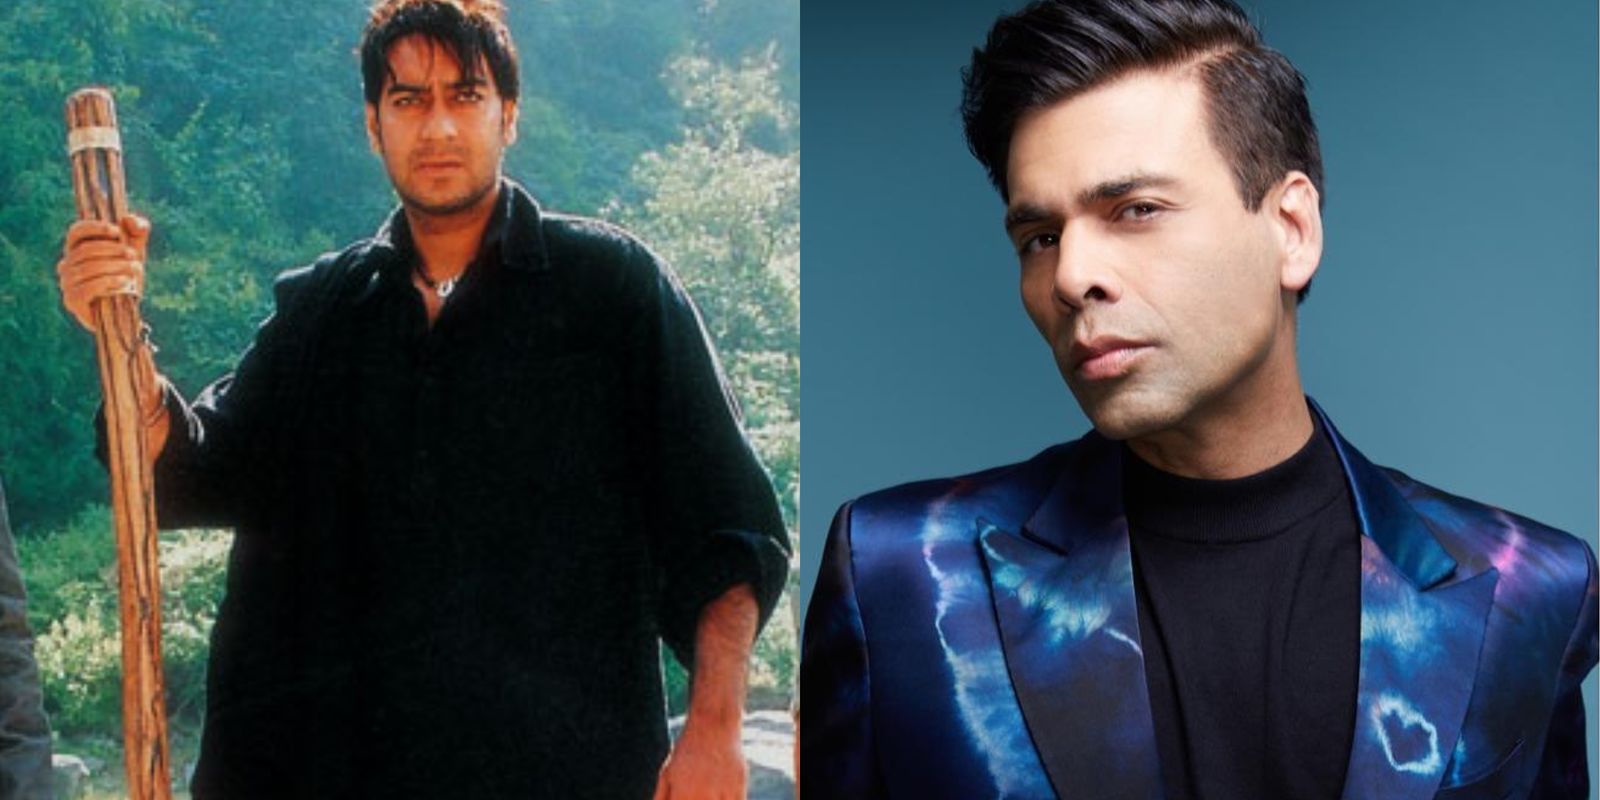 Karan Johar Jokes About Kaal Launching Bhoot Trailer: When I Wasn’t Scared After Watching Kaal, That Made Me Really Scared